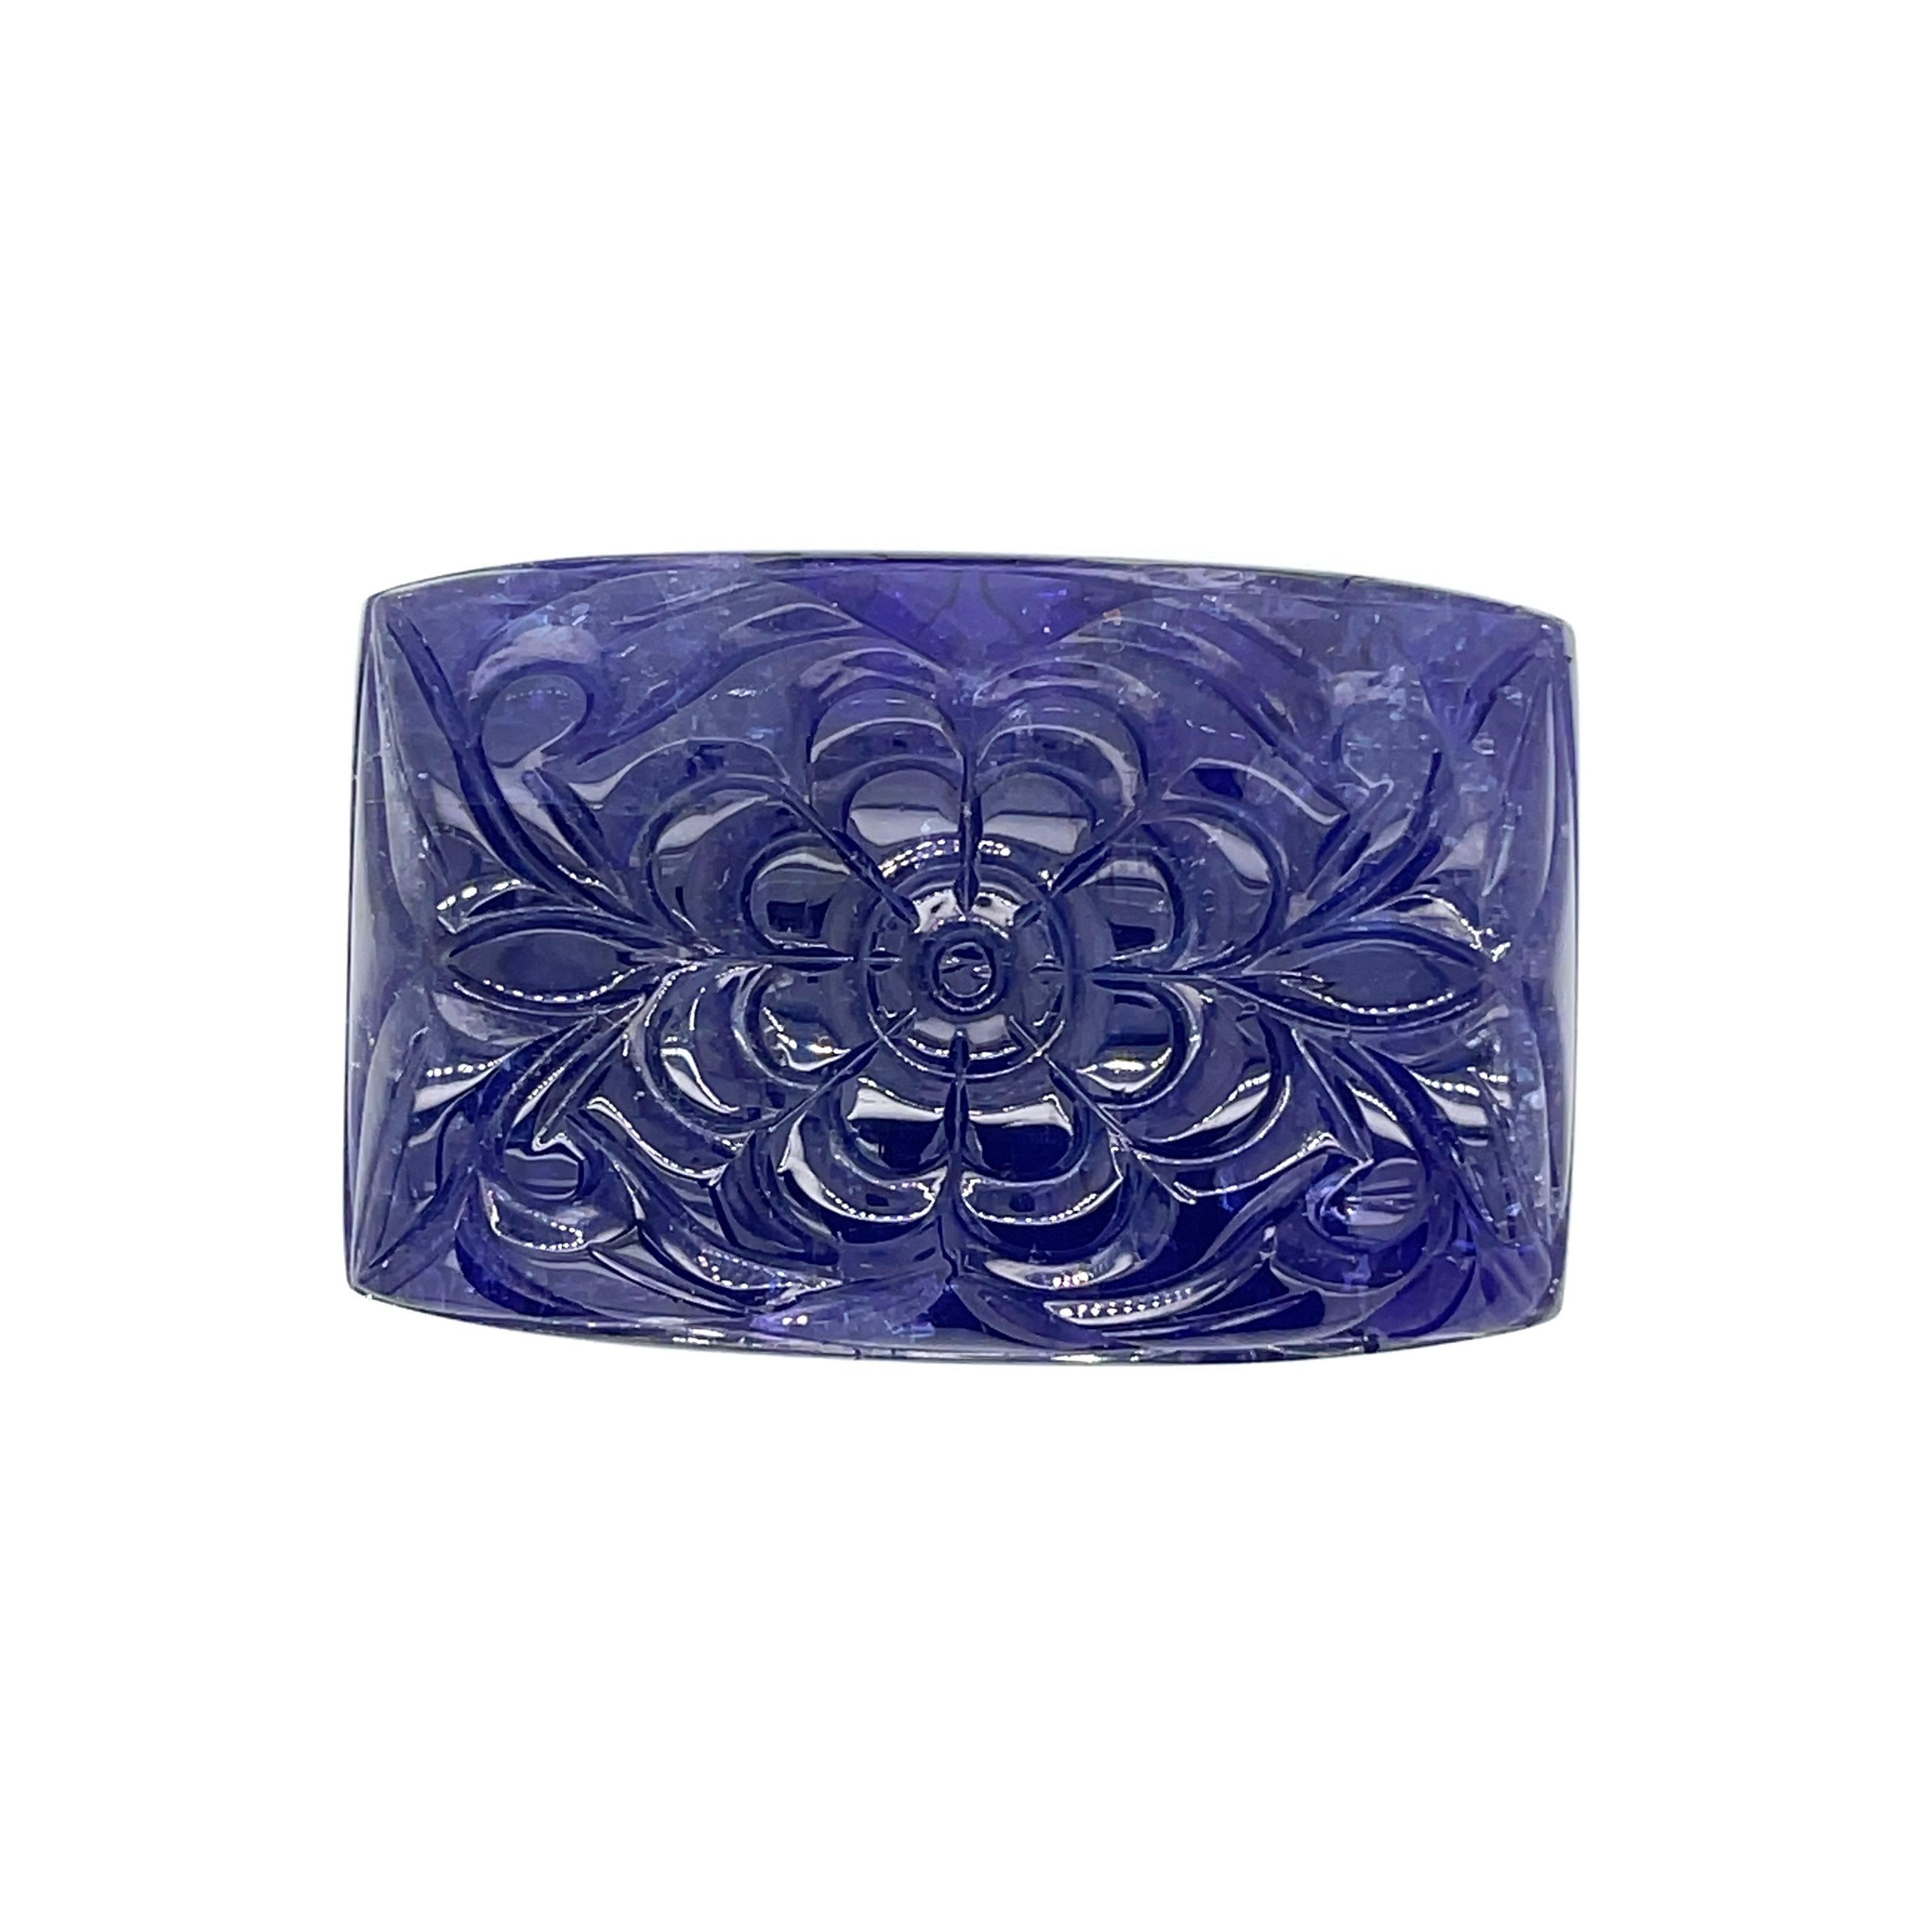 Square Cut Carved Flower Rectangular Tanzanite Cts 176.08 For Sale